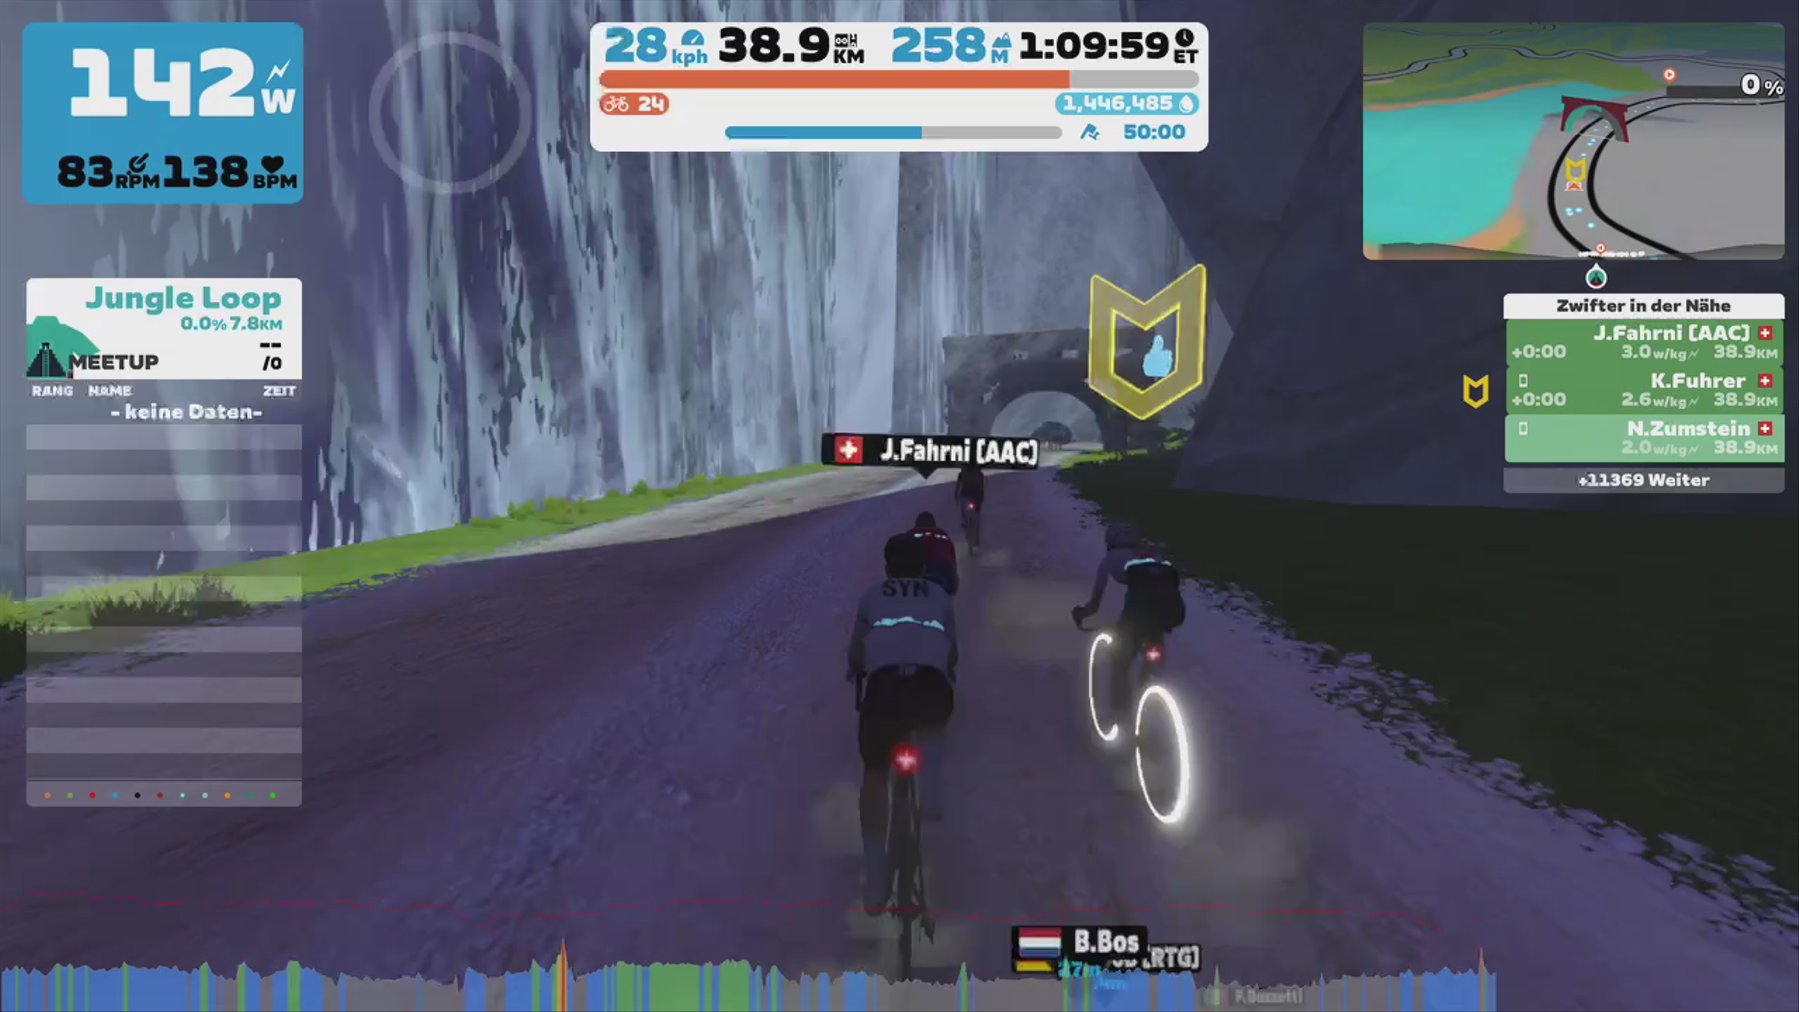 Zwift - Kathrin Fuhrer 's Meetup on Sugar Cookie in Watopia